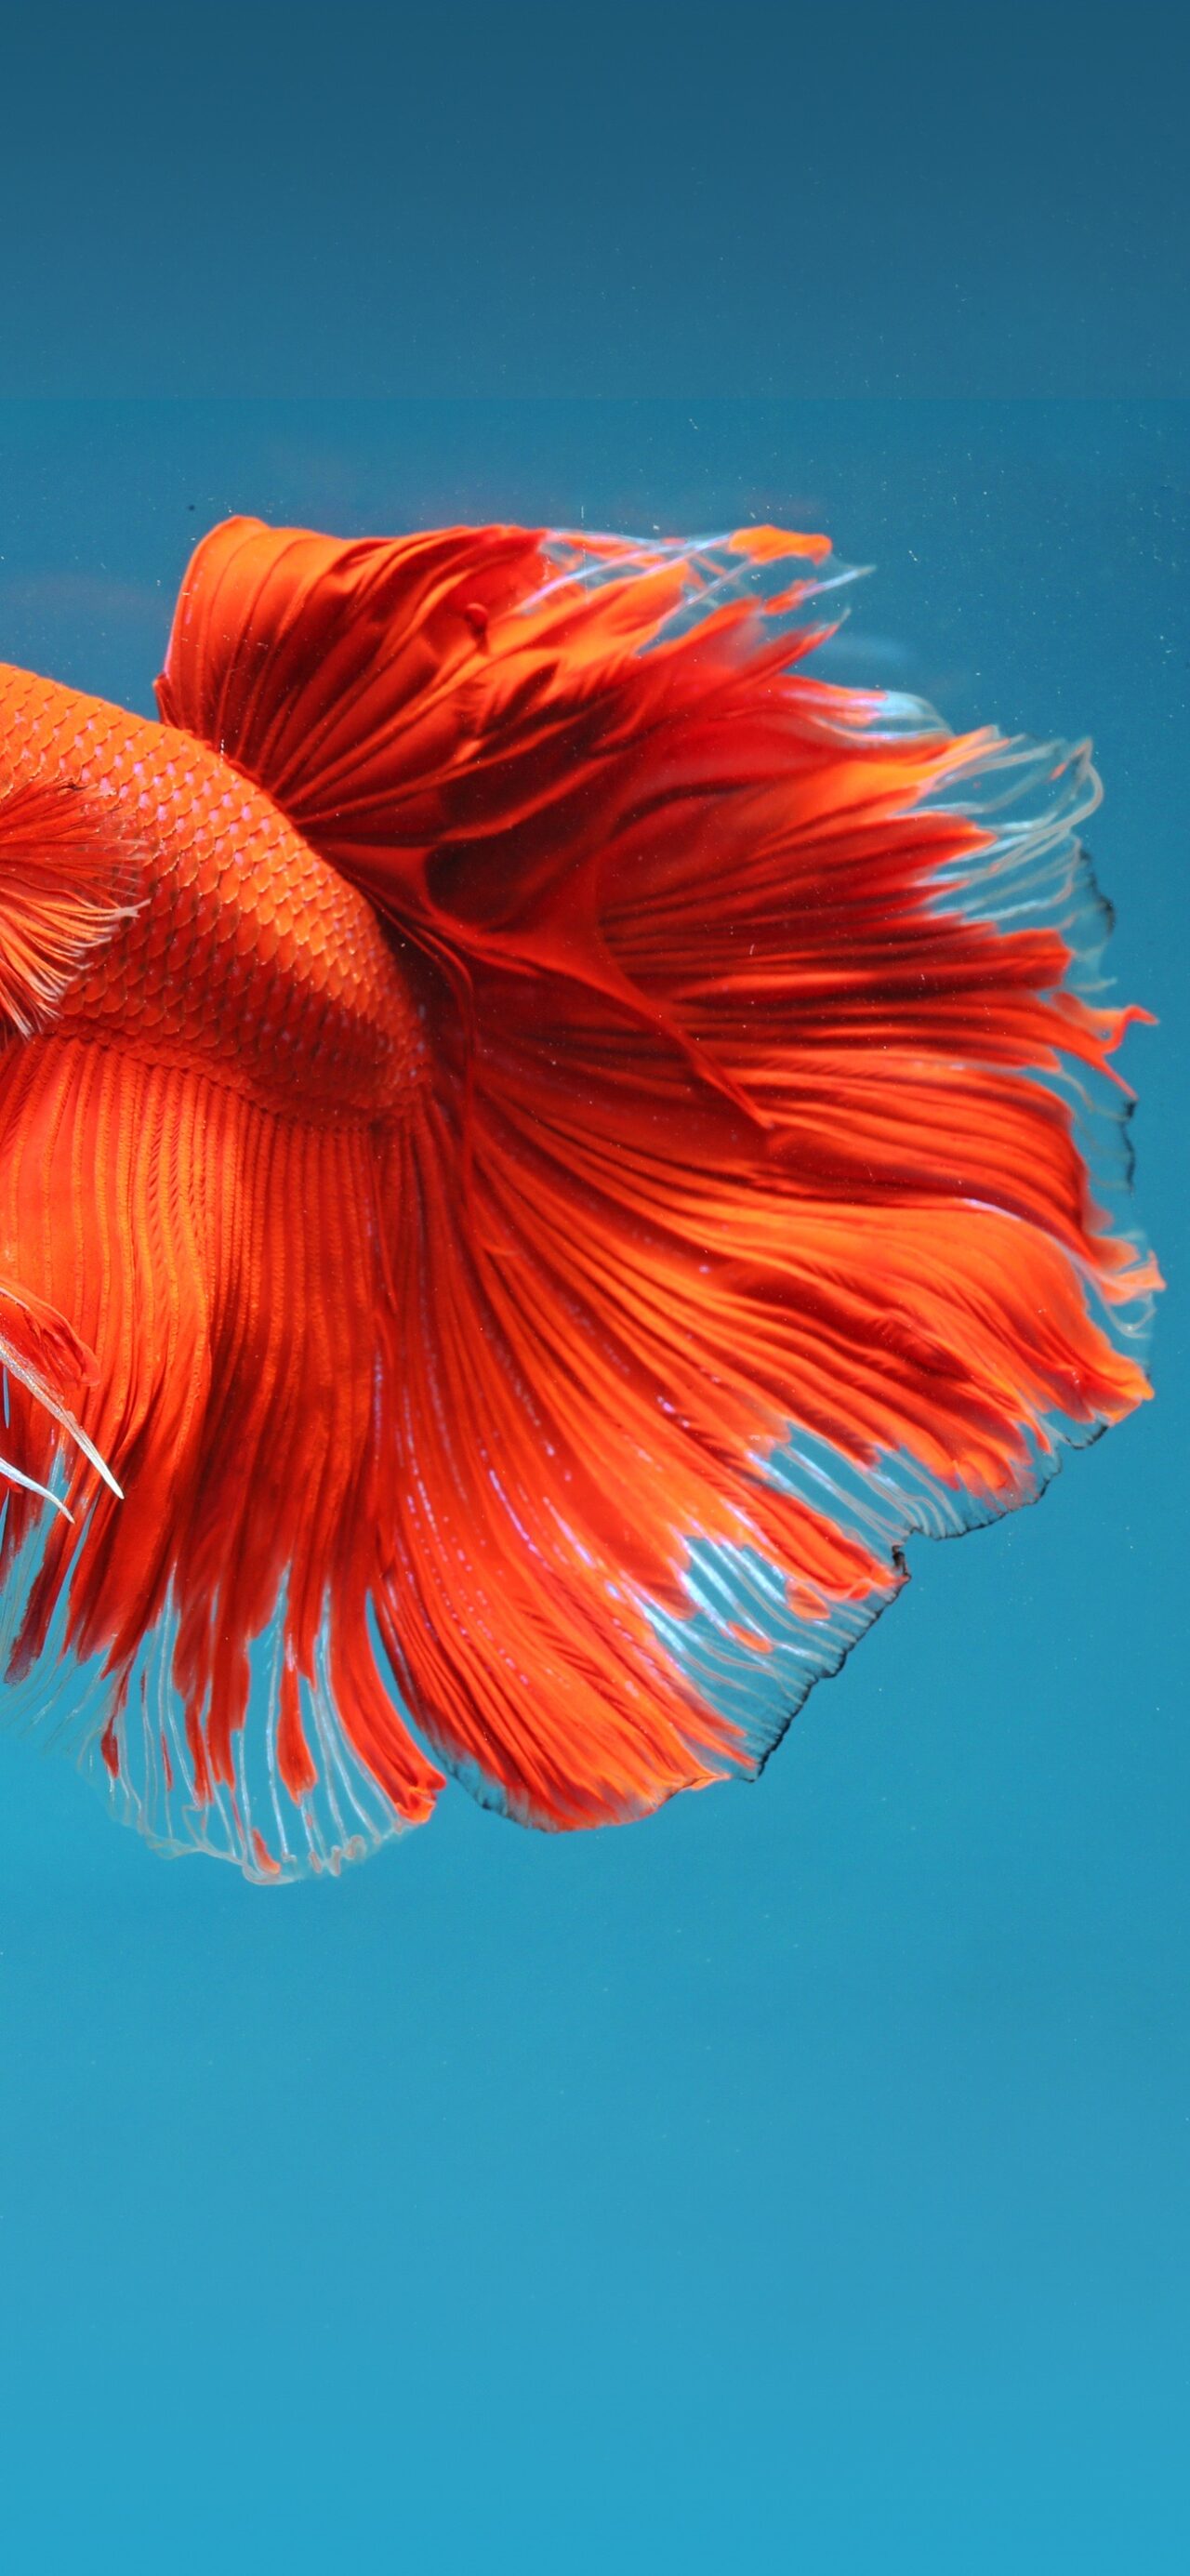 Red and blue betta fish stock photo Image of moving  145227106